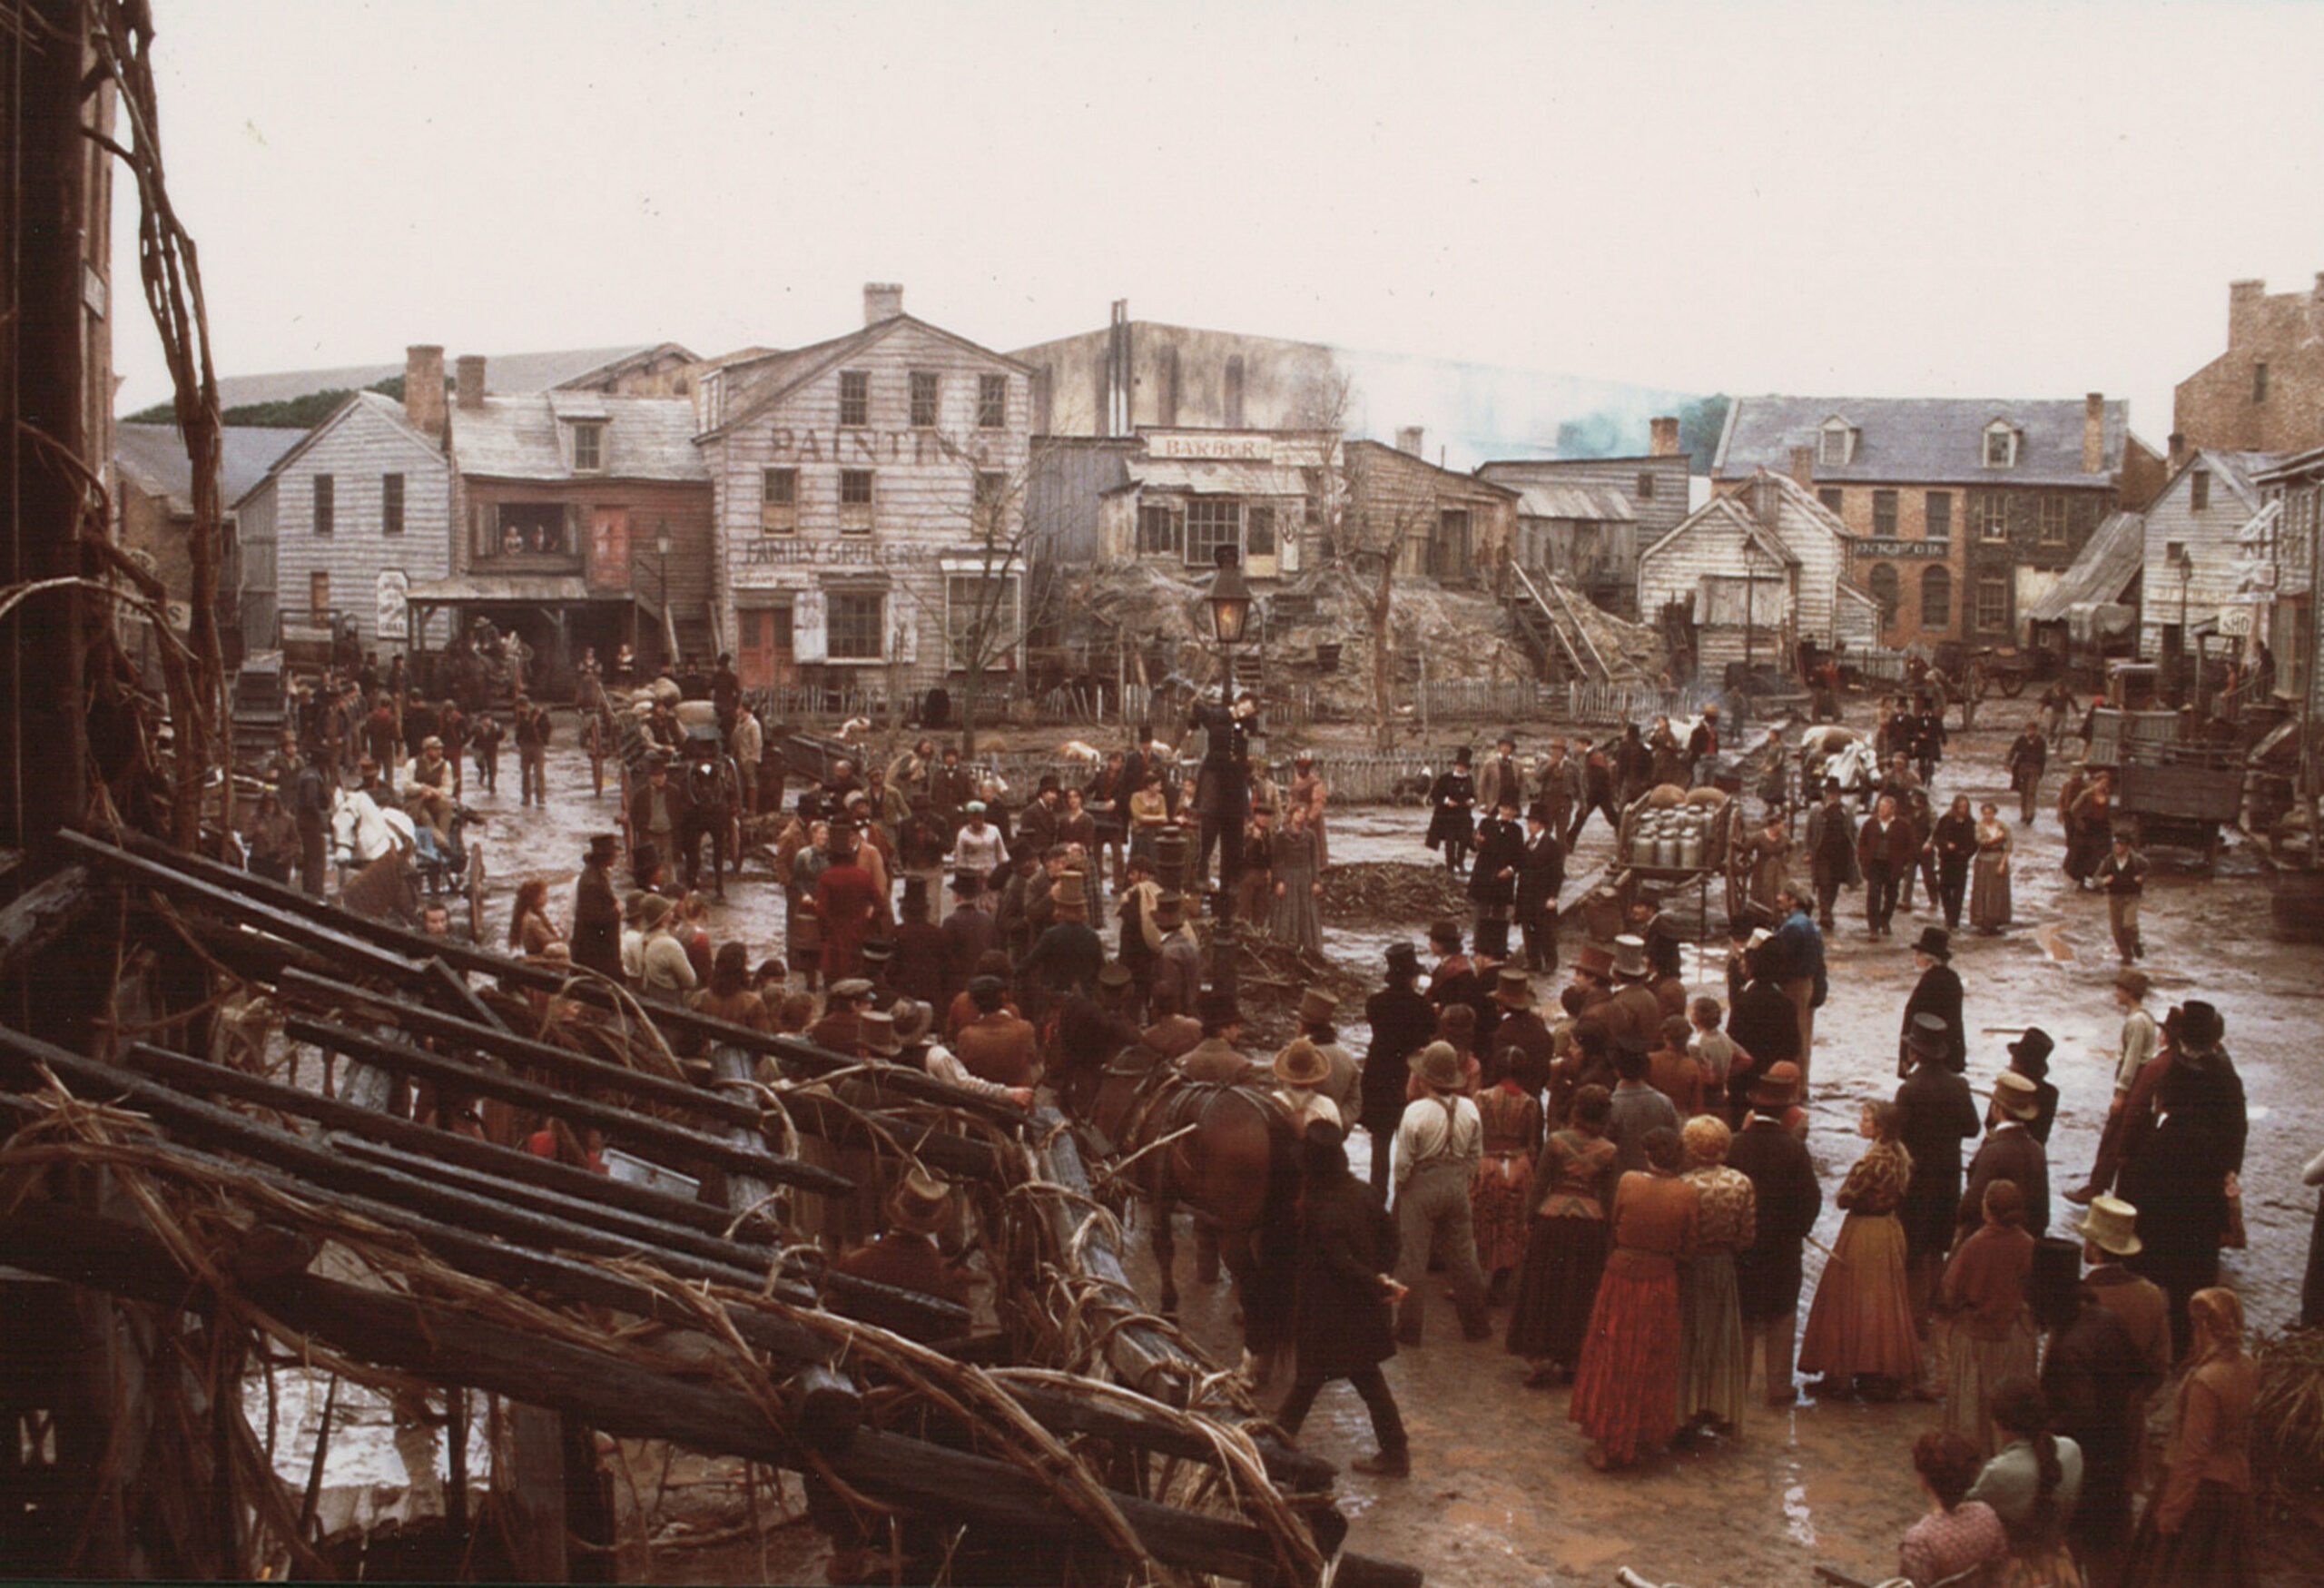 Gangs of New York - Directed by Martin Scorsese - Five Points Square Set - ©2002 - Miramax Films